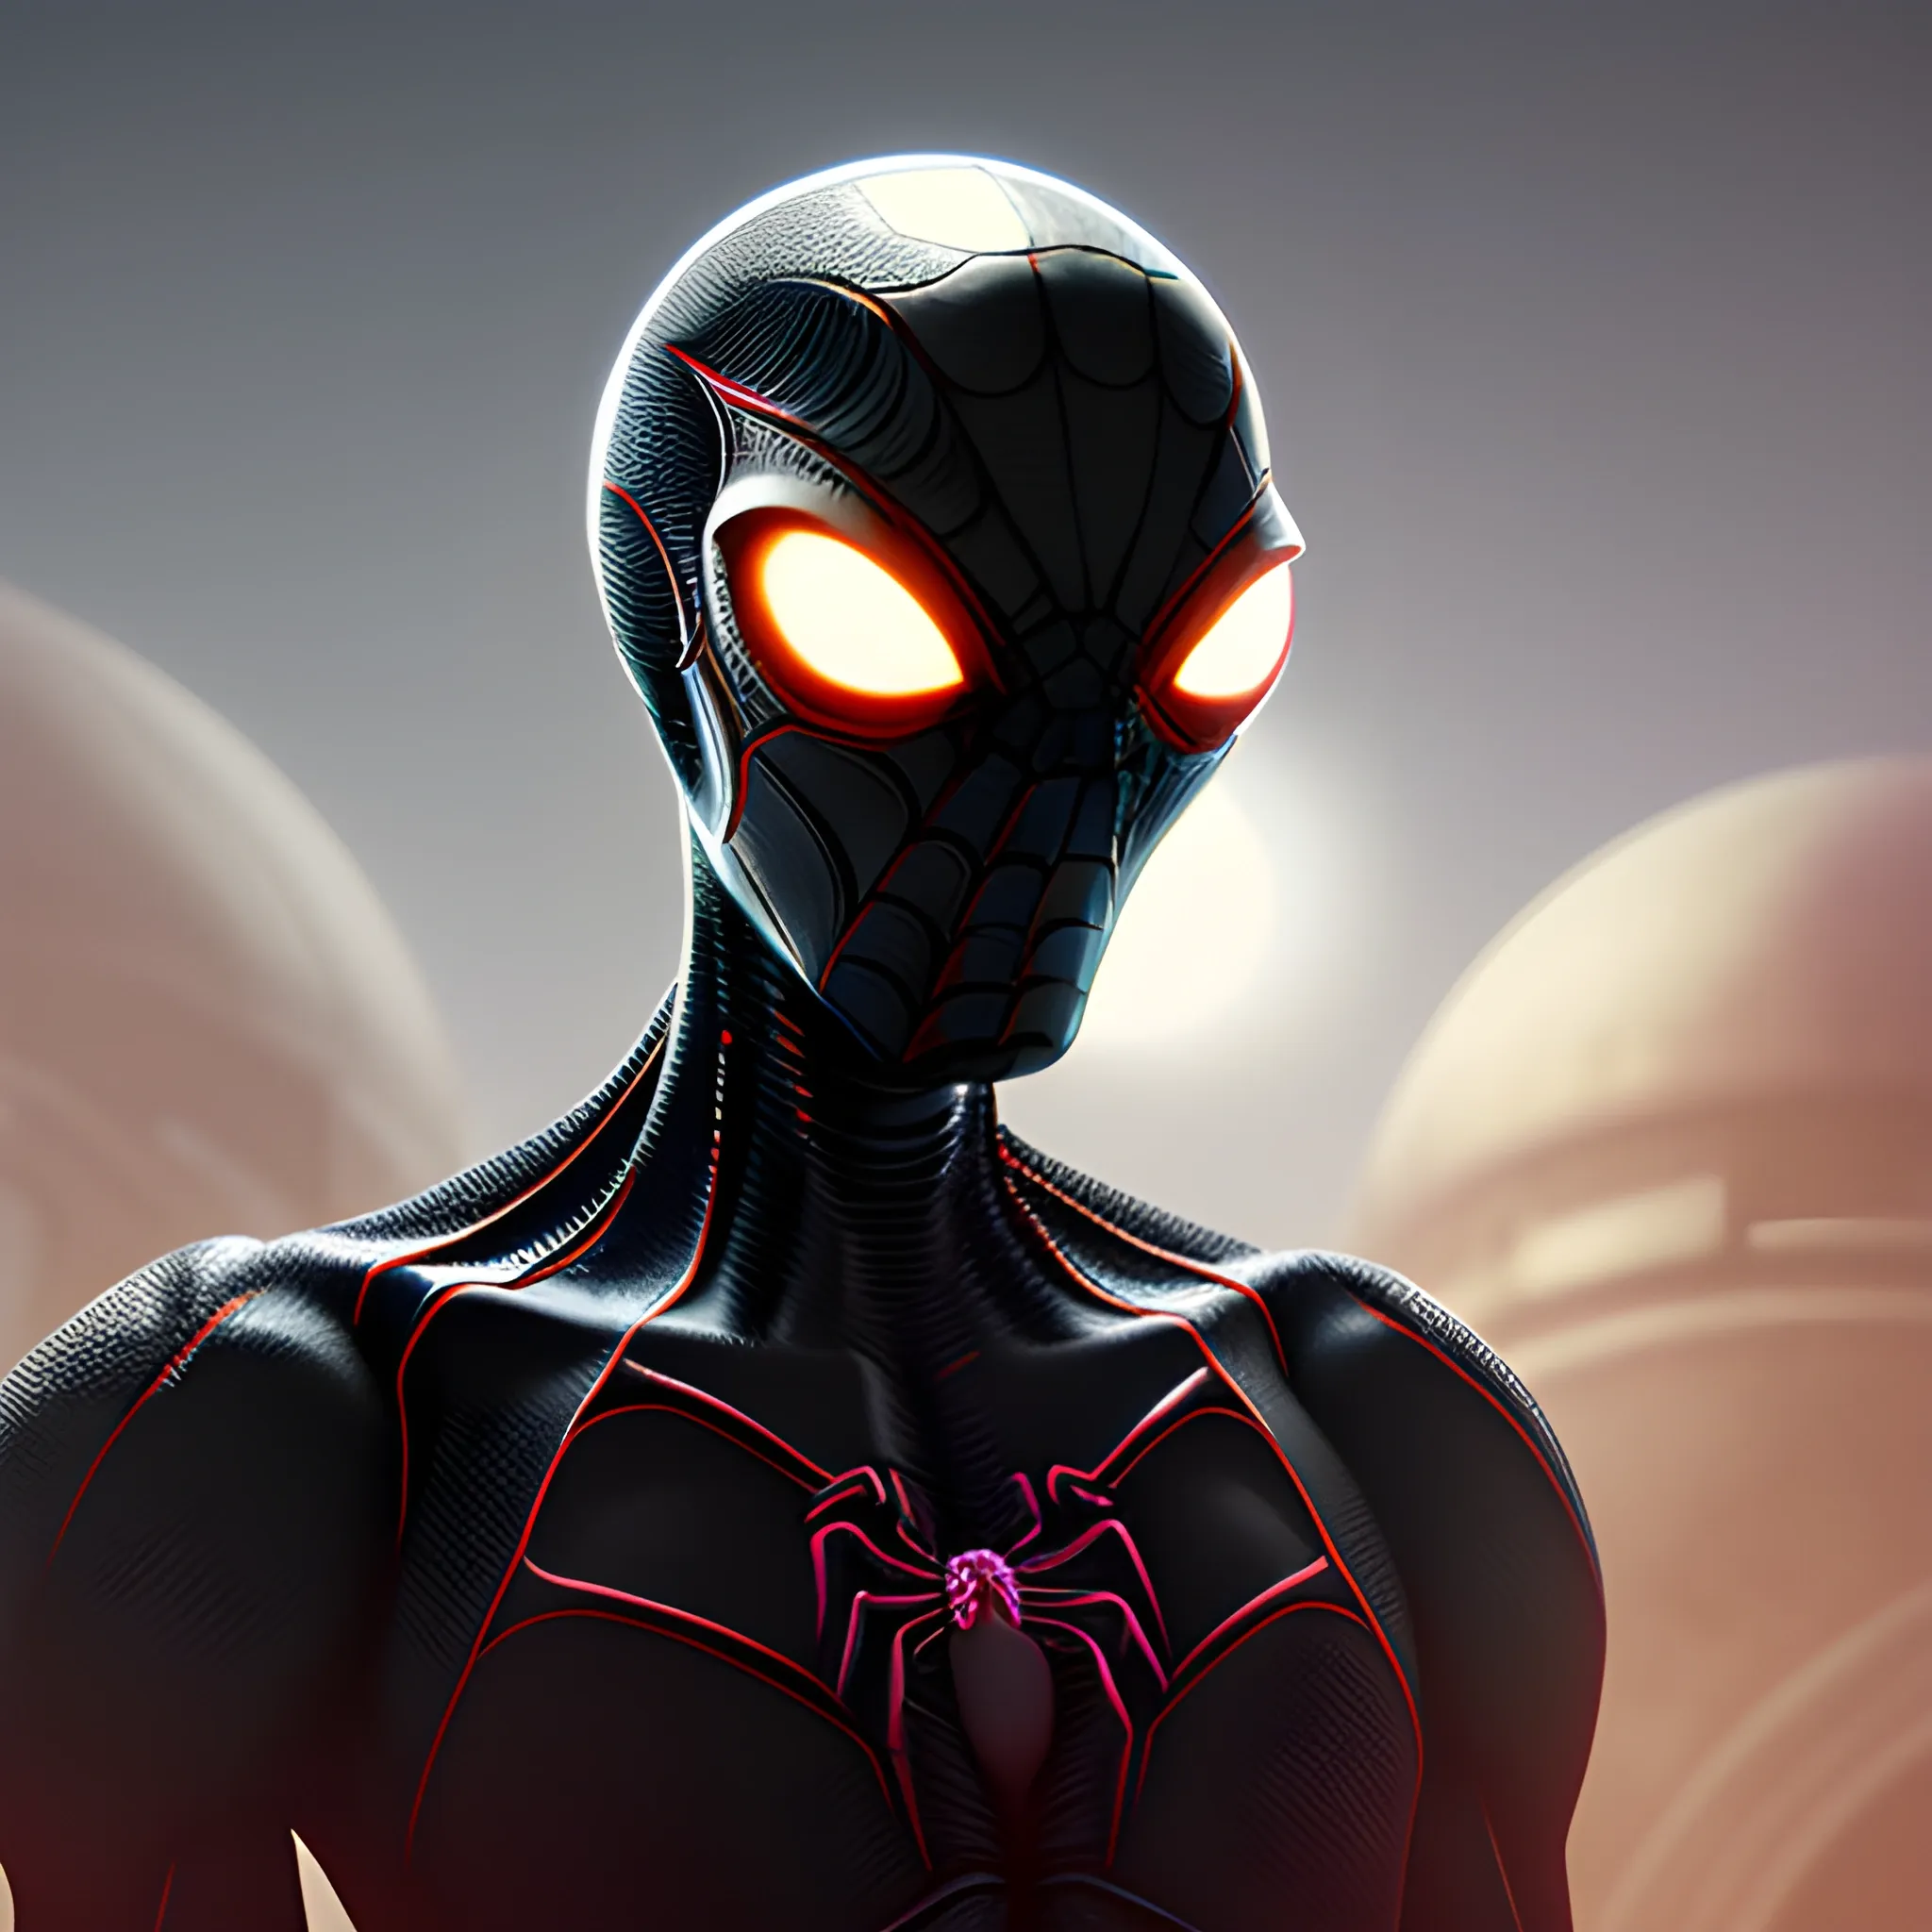 A high resolution, cinematic photo of a black spider alien engineer